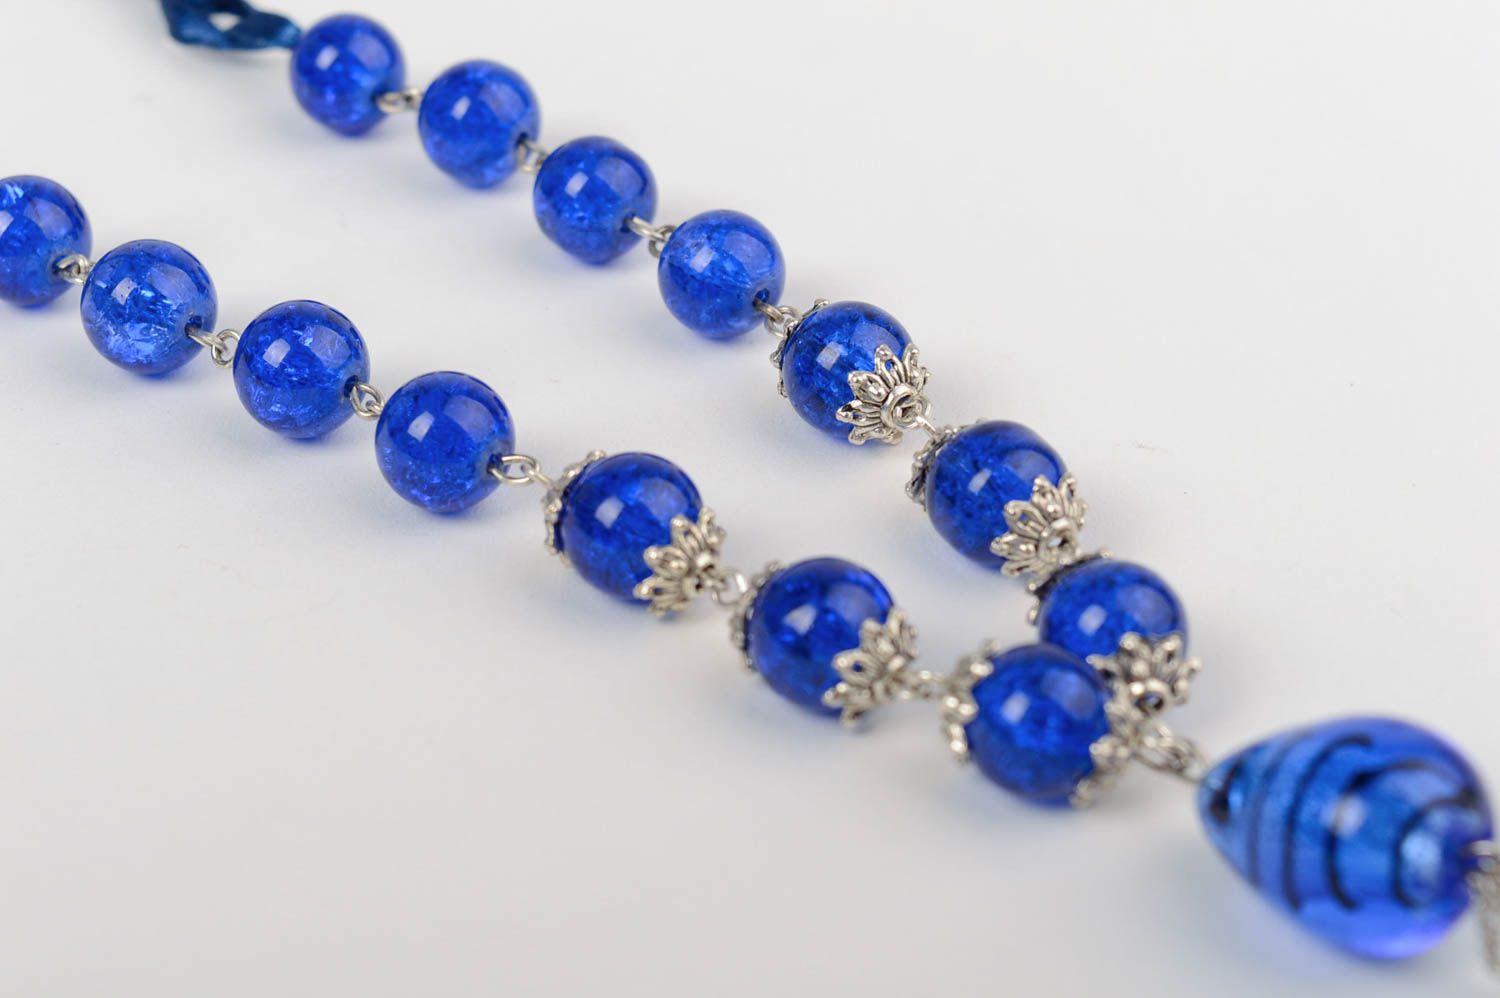 Handmade deep blue designer necklace with glass beads on satin ribbon photo 5